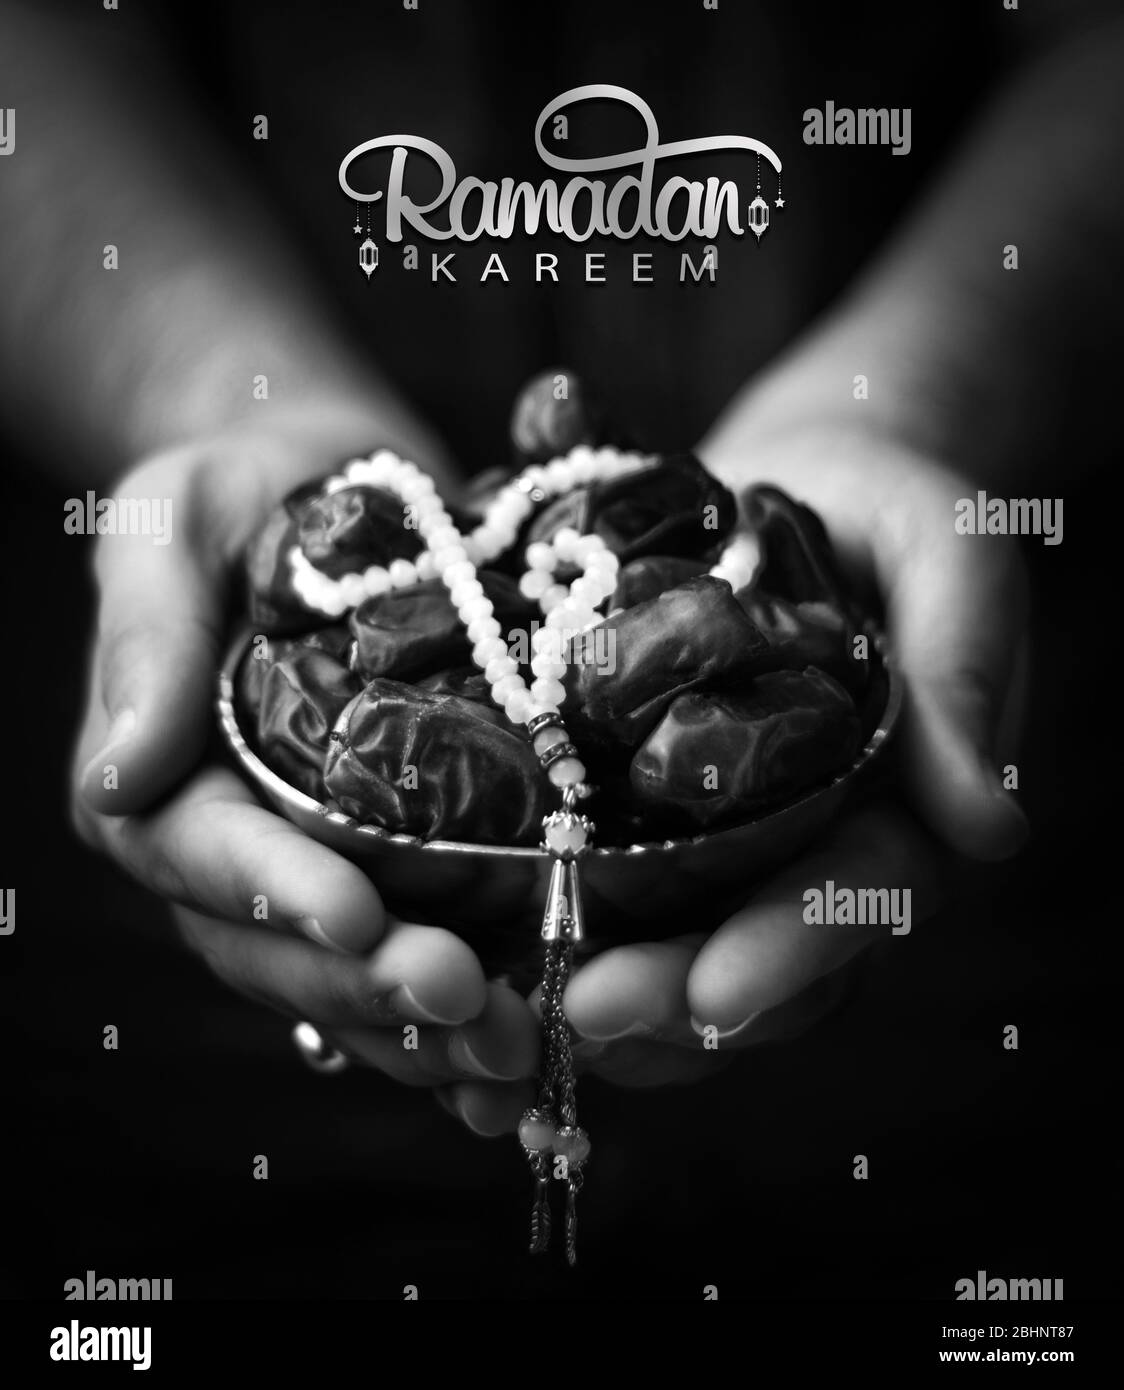 Ramadan concept black and white background holding dates in his hands with tasbeeh ramadan mubarak, fasting and iftar fruits background Stock Photo